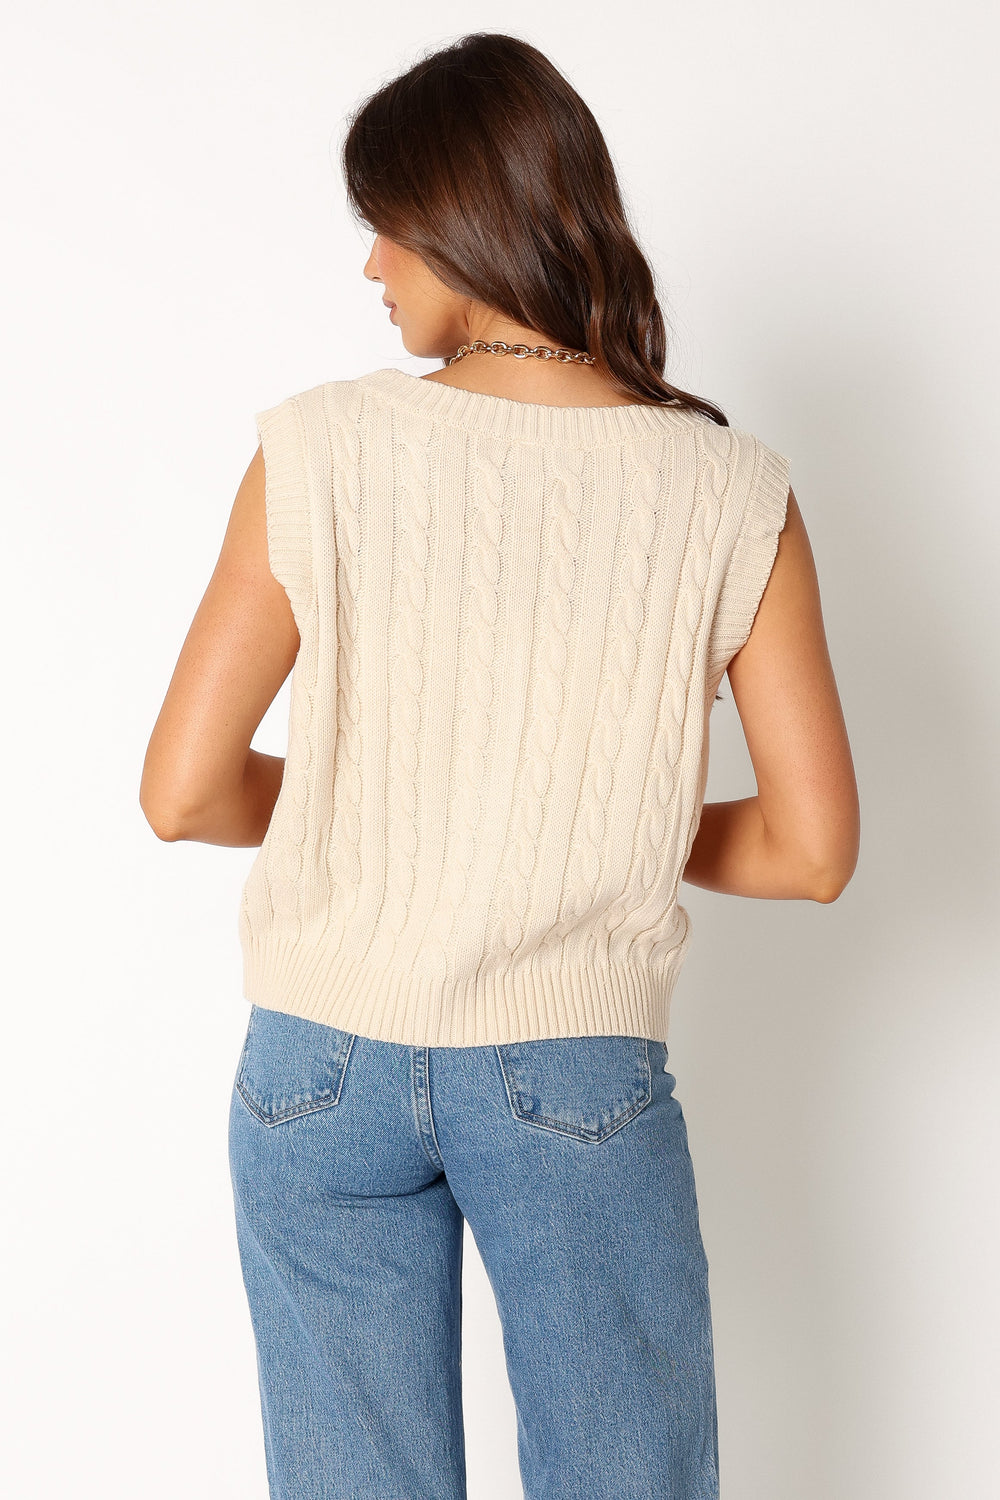 Petal and Pup USA TOPS Kyle Knit Vest - Cream